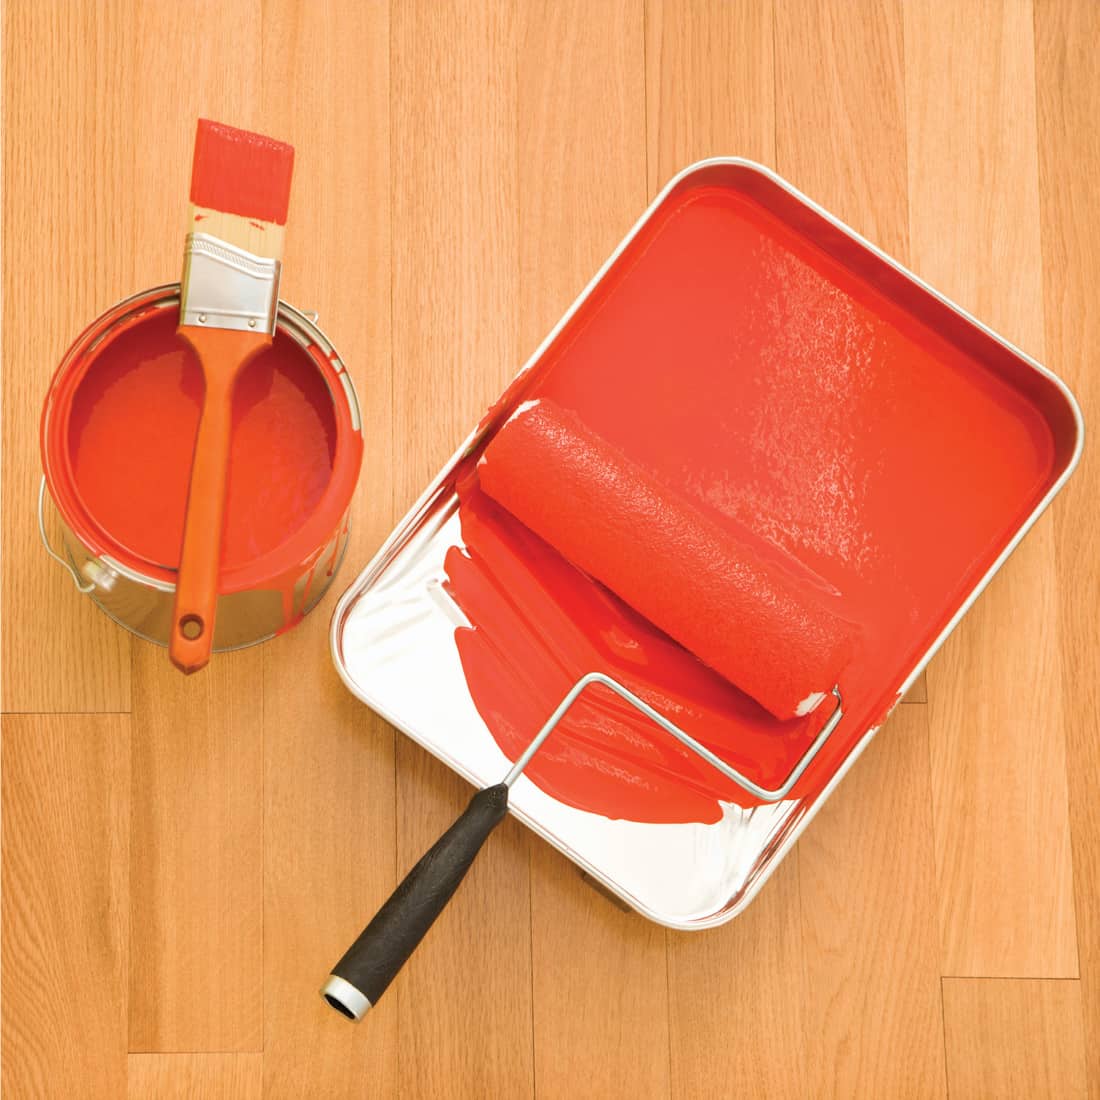 orange paint on paint can and tray with paintbrush and roller